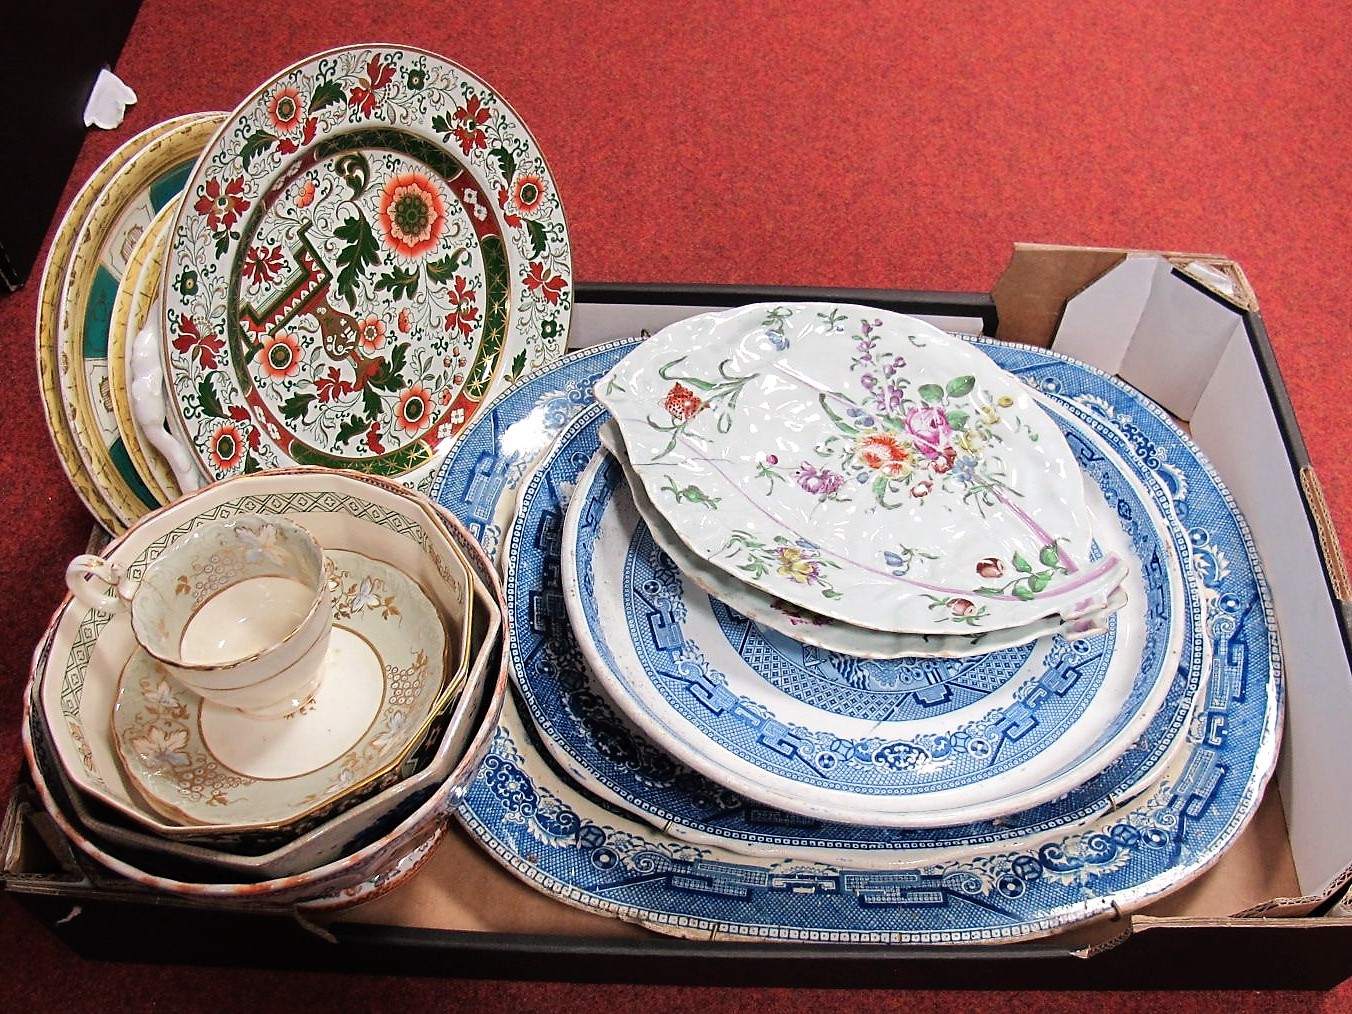 Victorian Willow Pattern Wares, including meat plates, cake stand, and other Victorian pottery,